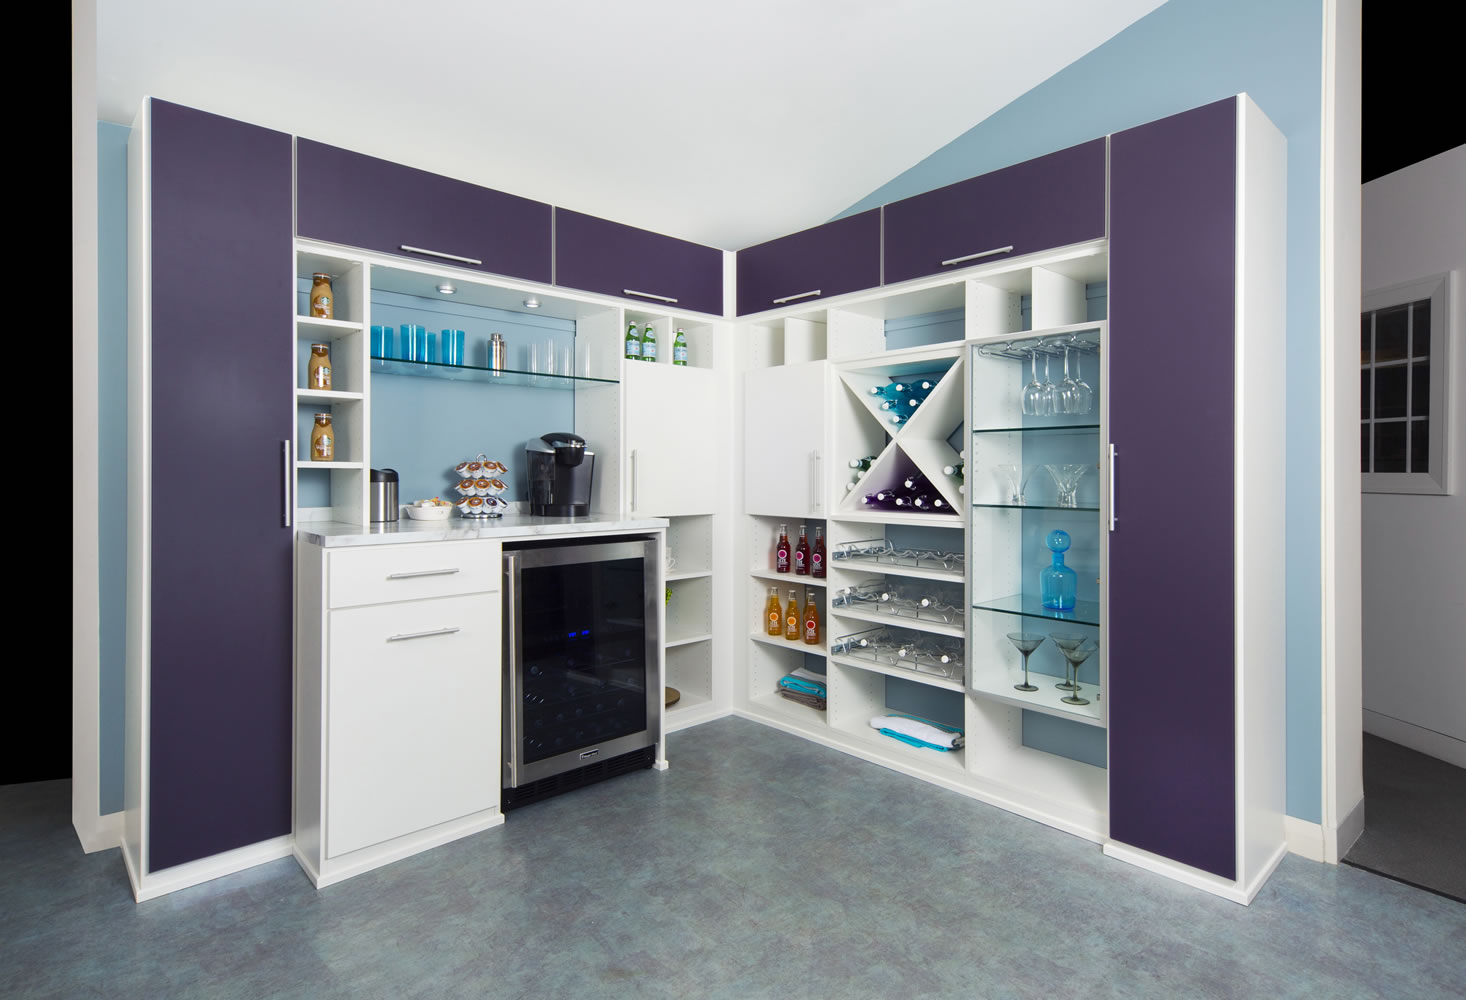 More new homeowners are carving out space in the kitchen for walk-in pantries such as California Closets&#039; Modern Pantry, which features a wine refrigerator, and high-end shelving and storage.